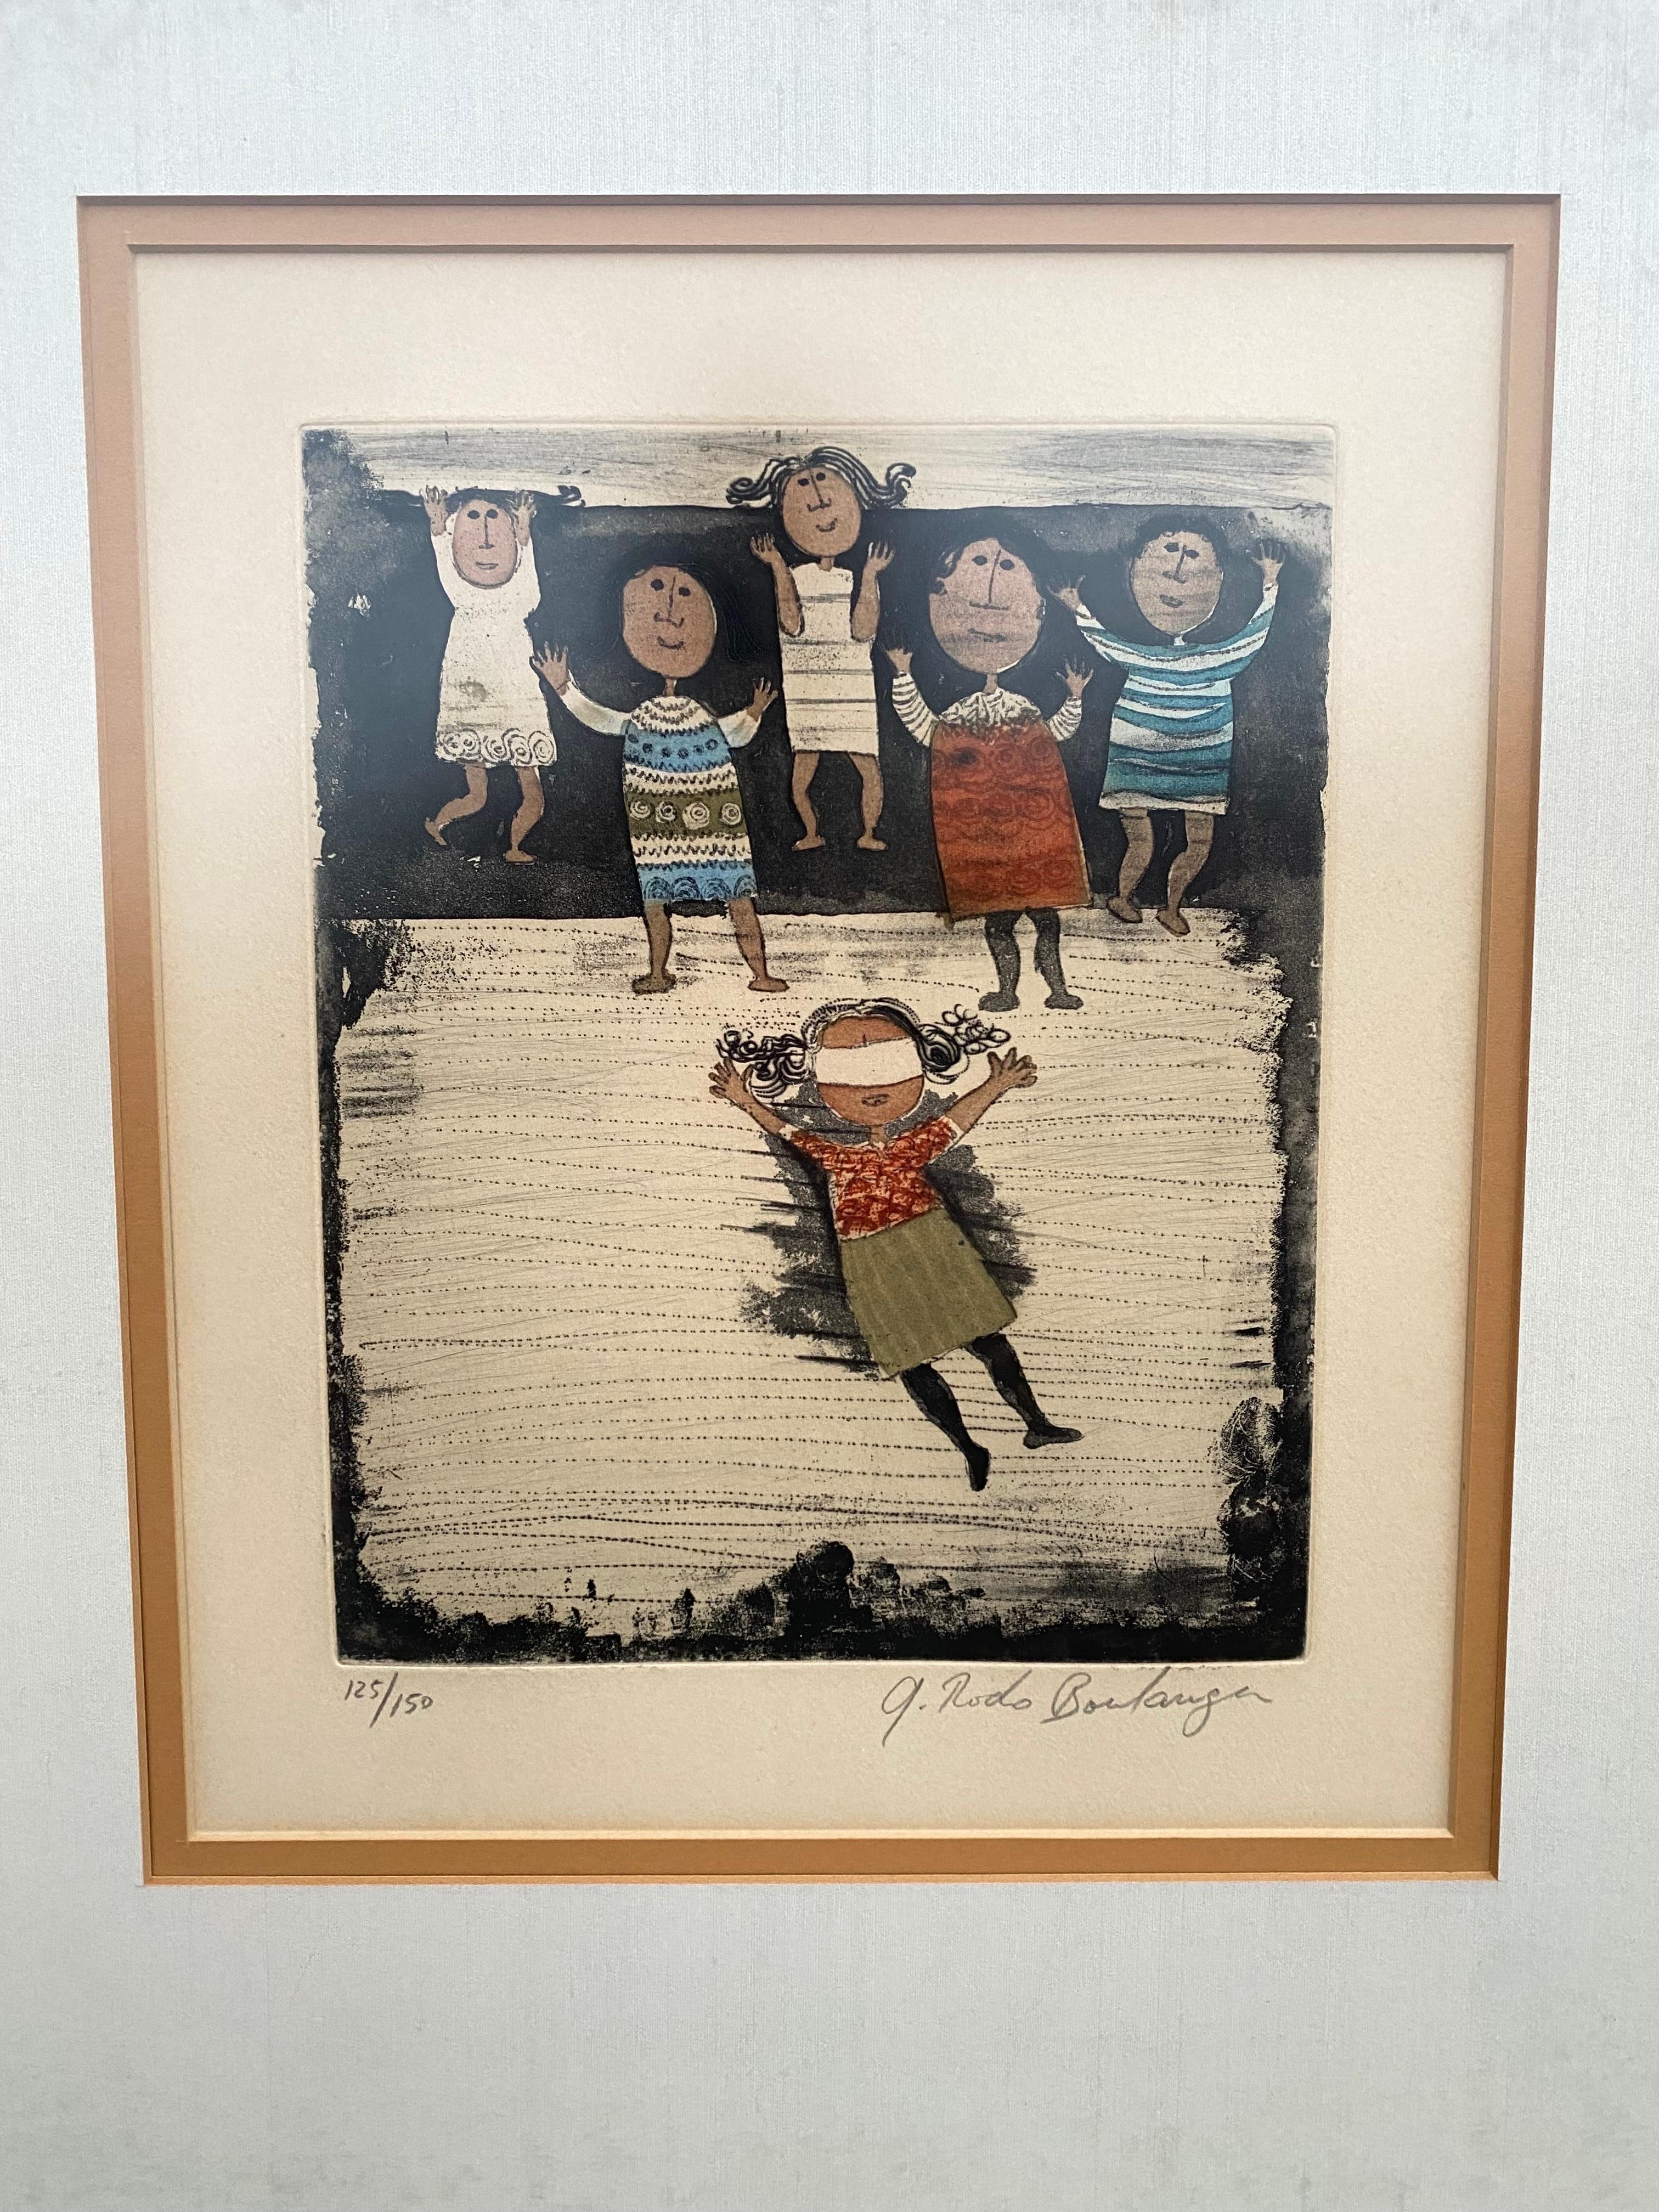 Graciela Rodo Boulanger Color Lithograph of Children.   Signed and numbered 125/150.  Nice Colors, overall in great shape!  Looks like original frame.